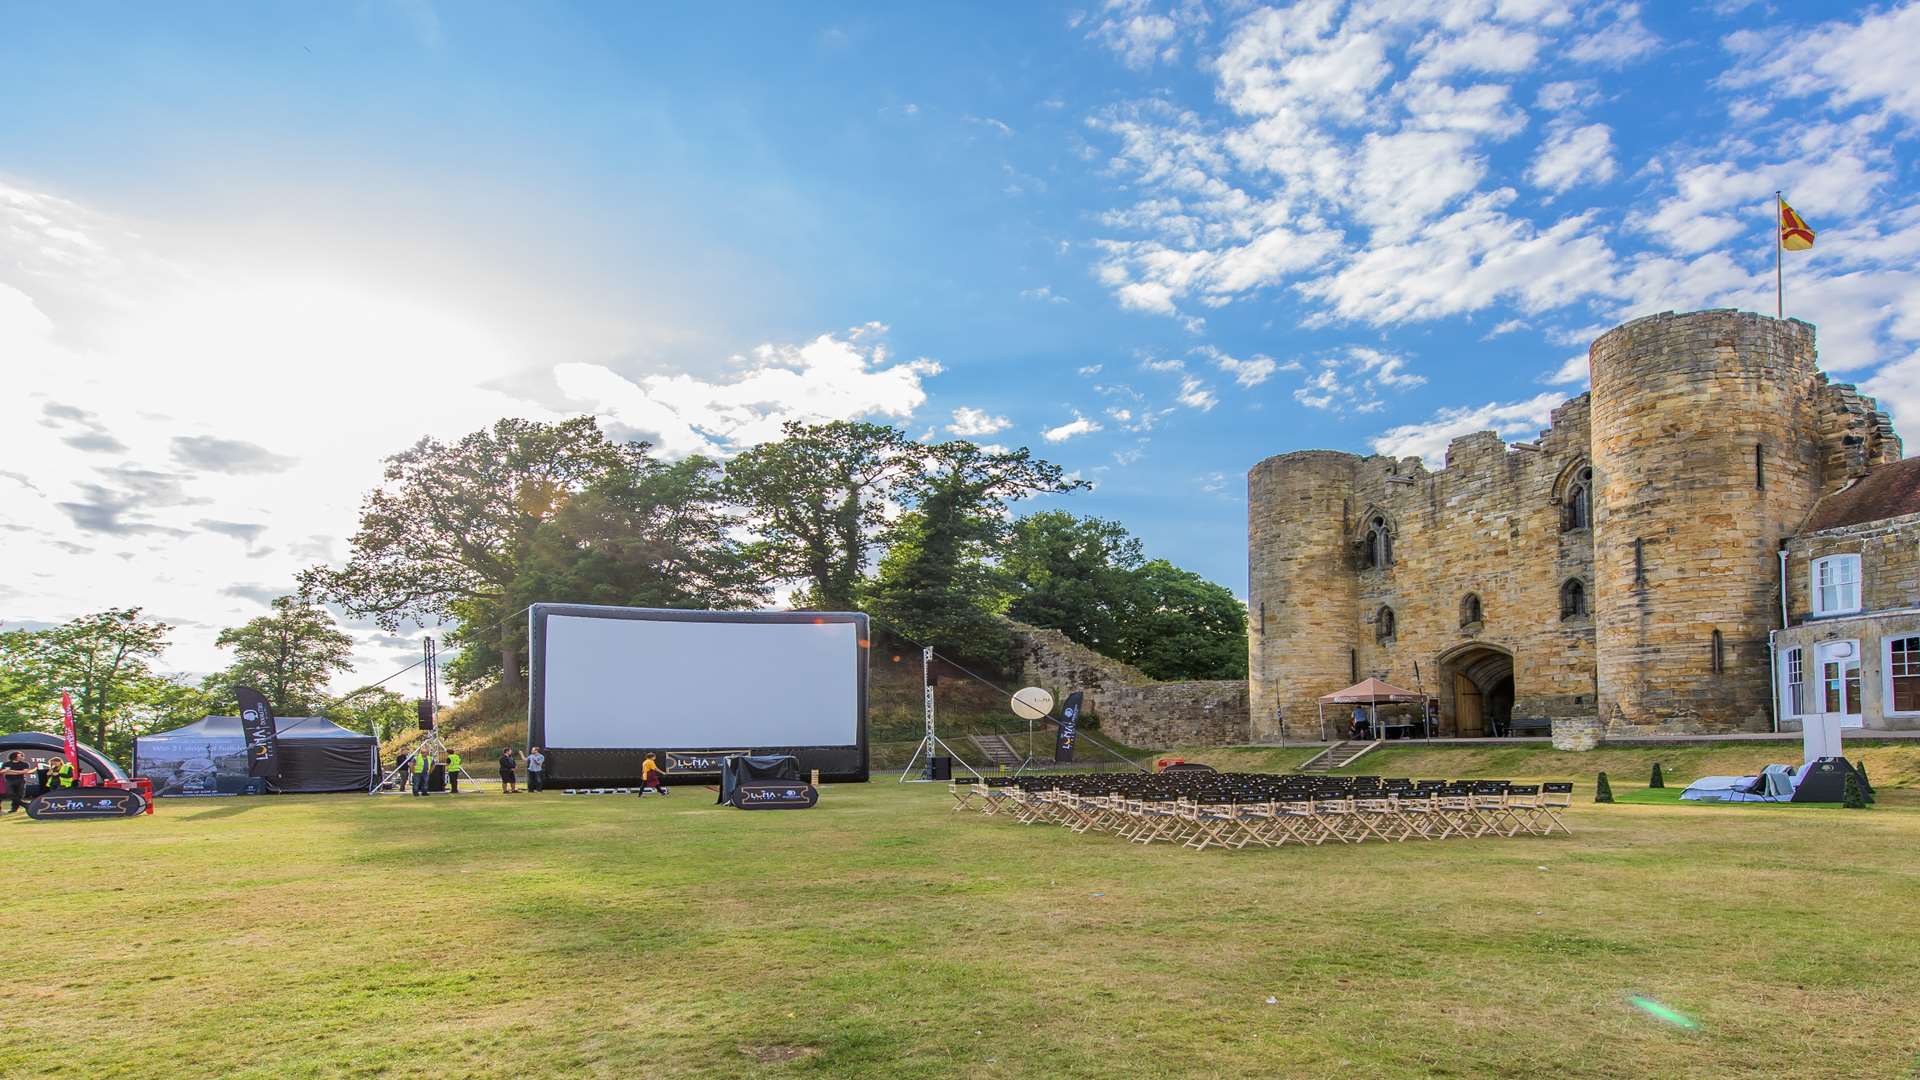 The screen is set up for Tonbridge Castle's first open air cinema. Picture: Nik Dudley Photography